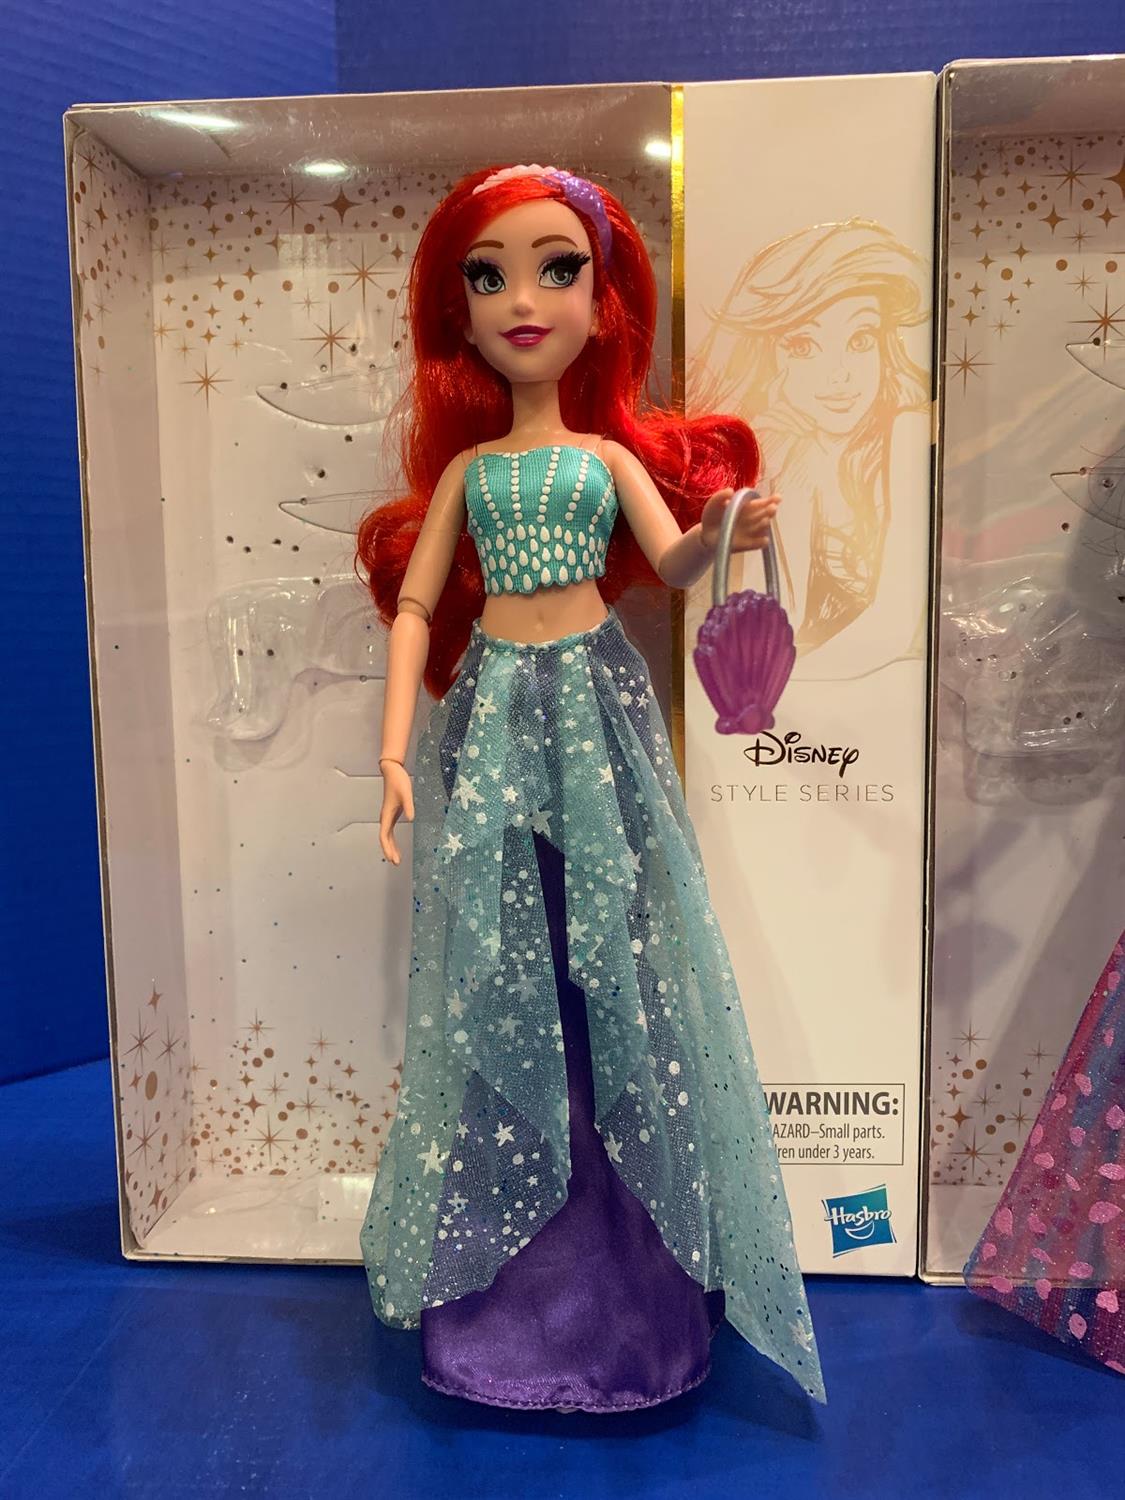 Doll Review: Disney Style Series by Hasbro - LaughingPlace.com